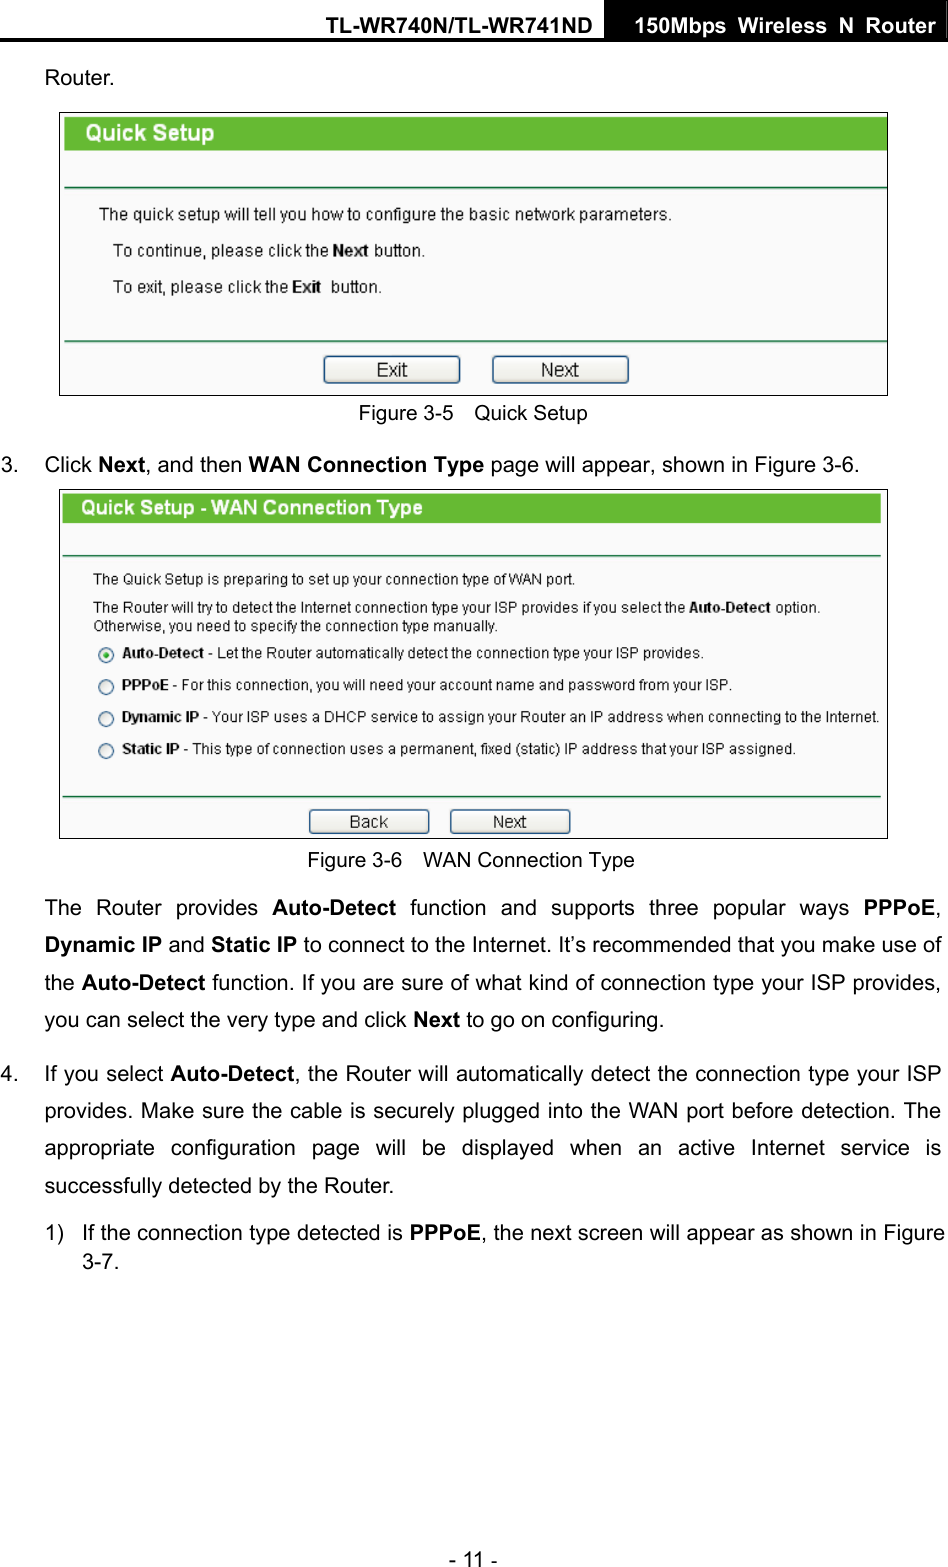 TL-WR740N/TL-WR741ND 150Mbps Wireless N Router - 11 - Router.   Figure 3-5    Quick Setup 3. Click Next, and then WAN Connection Type page will appear, shown in Figure 3-6.  Figure 3-6    WAN Connection Type The Router provides Auto-Detect function and supports three popular ways PPPoE, Dynamic IP and Static IP to connect to the Internet. It’s recommended that you make use of the Auto-Detect function. If you are sure of what kind of connection type your ISP provides, you can select the very type and click Next to go on configuring. 4.  If you select Auto-Detect, the Router will automatically detect the connection type your ISP provides. Make sure the cable is securely plugged into the WAN port before detection. The appropriate configuration page will be displayed when an active Internet service is successfully detected by the Router. 1)  If the connection type detected is PPPoE, the next screen will appear as shown in Figure 3-7. 